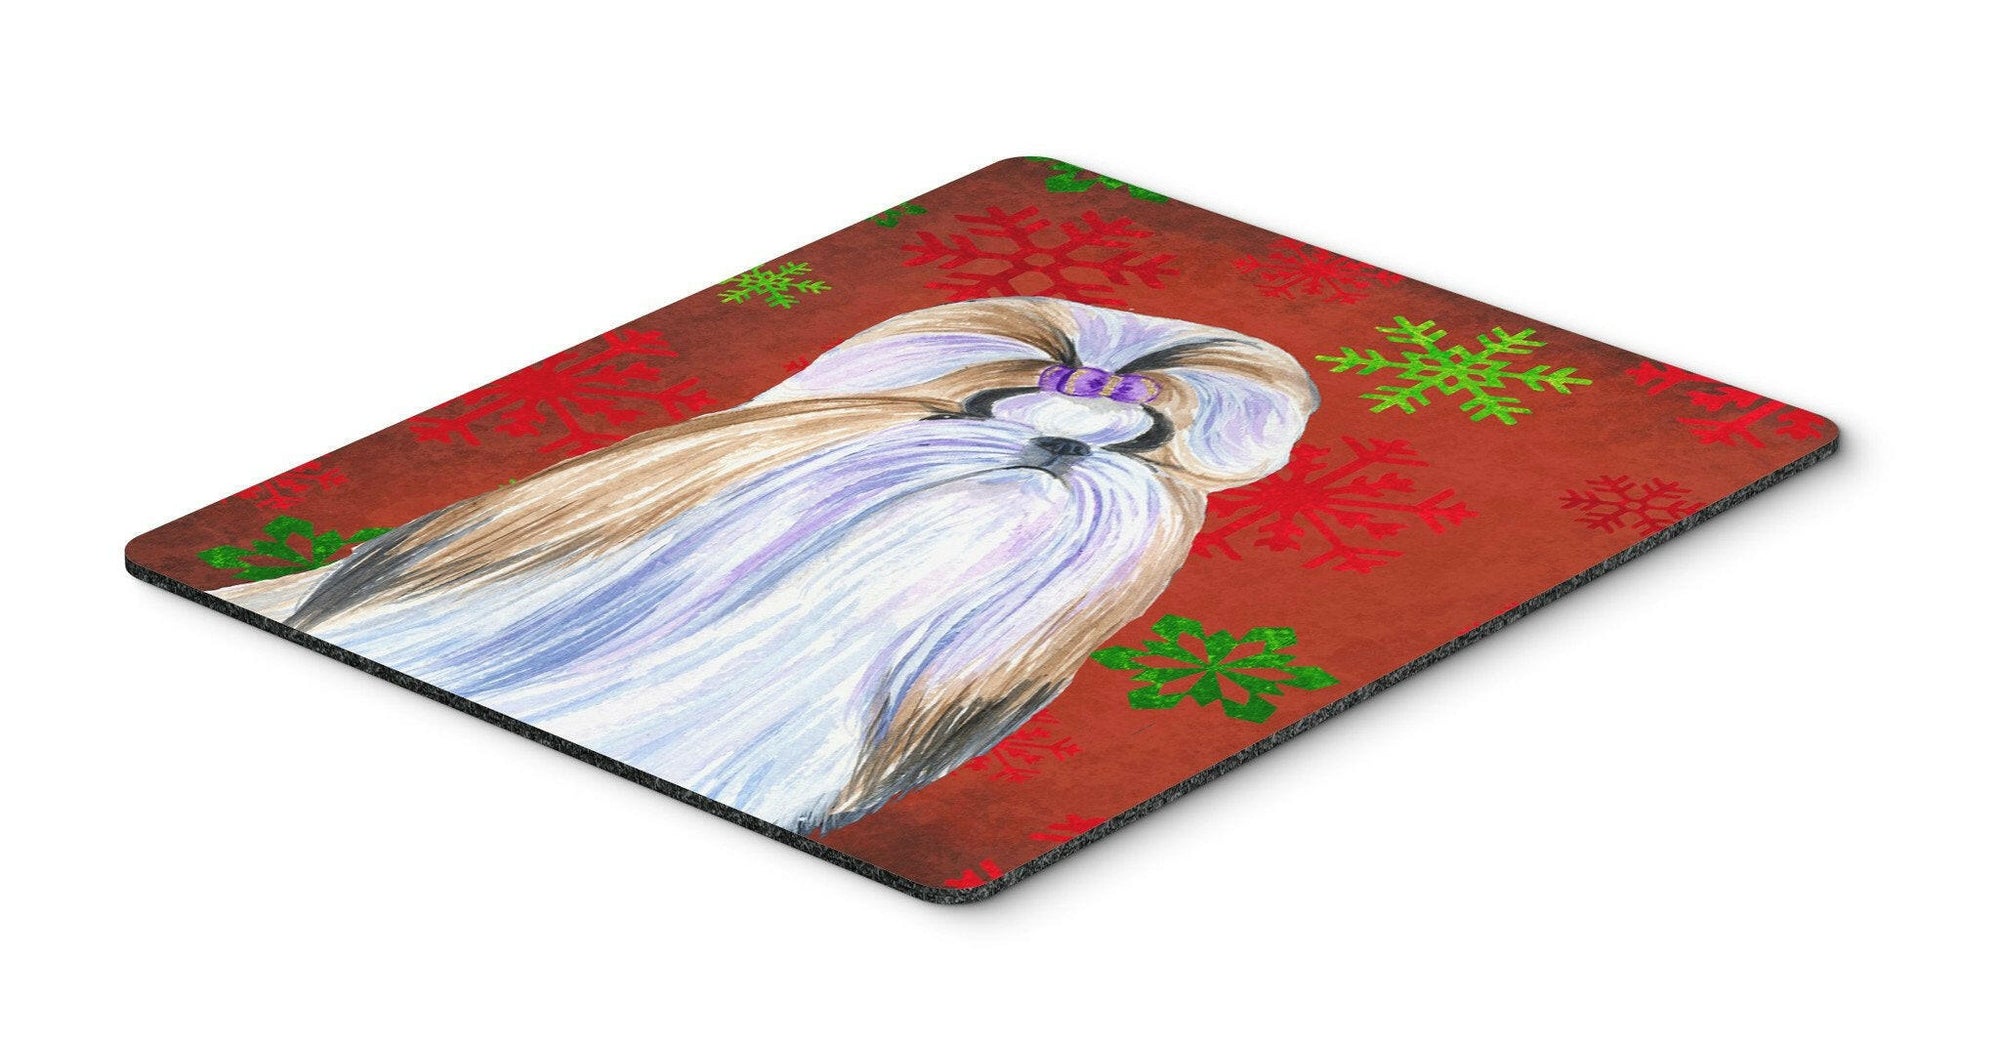 Shih Tzu Red and Green Snowflakes Christmas Mouse Pad, Hot Pad or Trivet by Caroline's Treasures